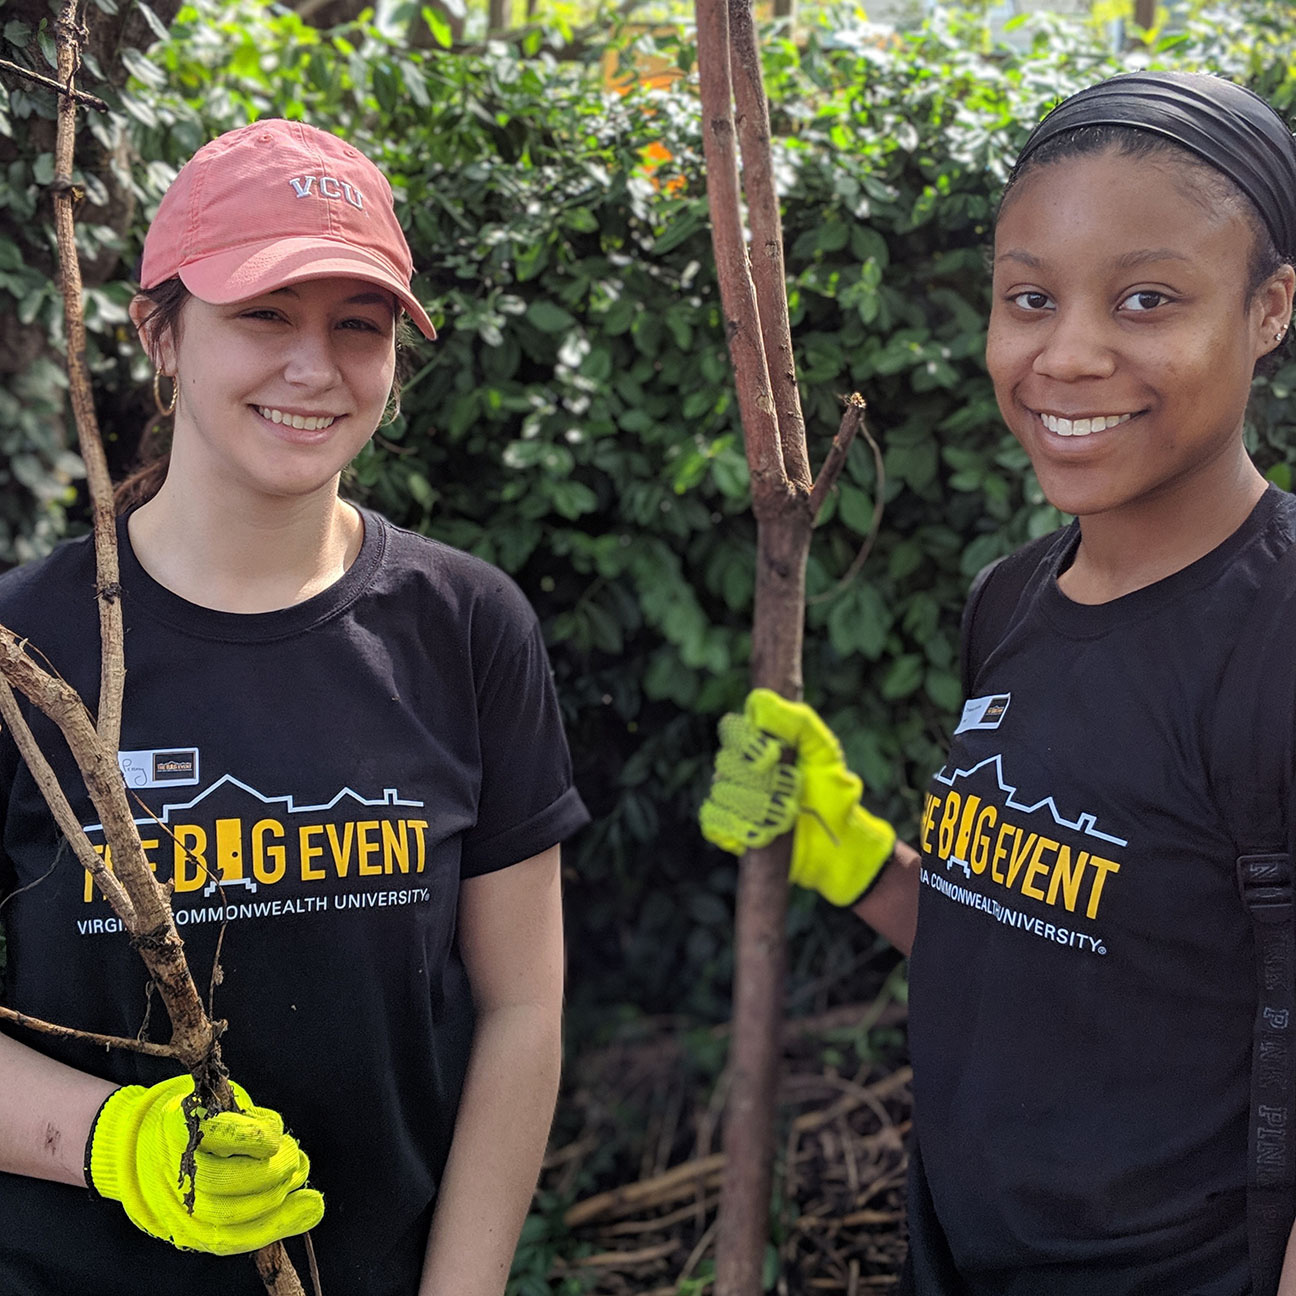 Two student volunteers holding large sticks